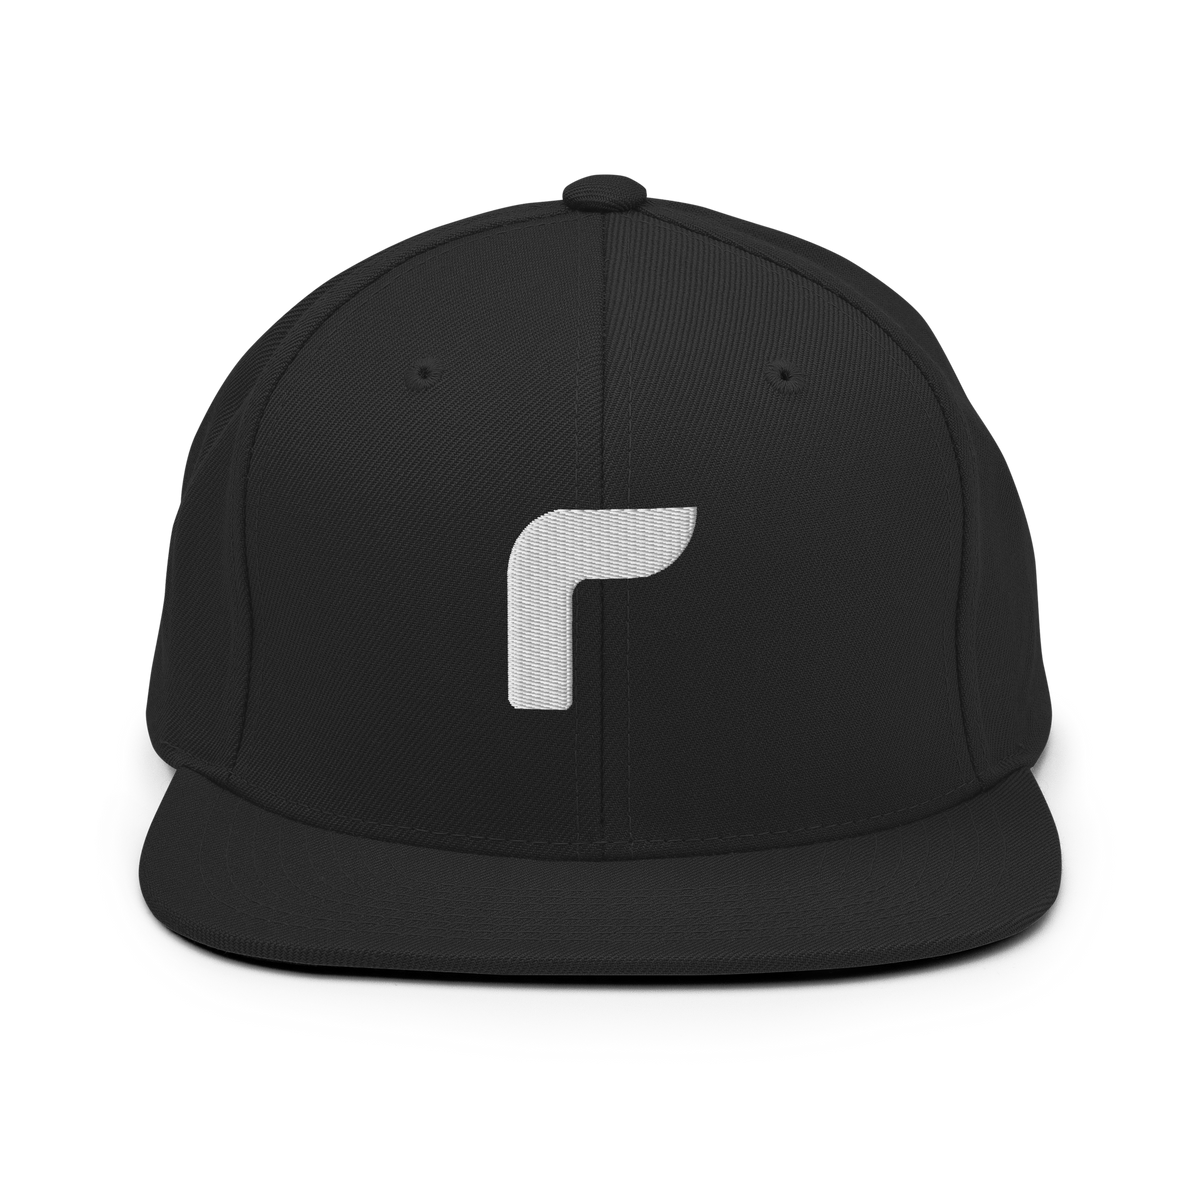 Richland R1 Schools | On Demand | Embroidered Snapback Hat